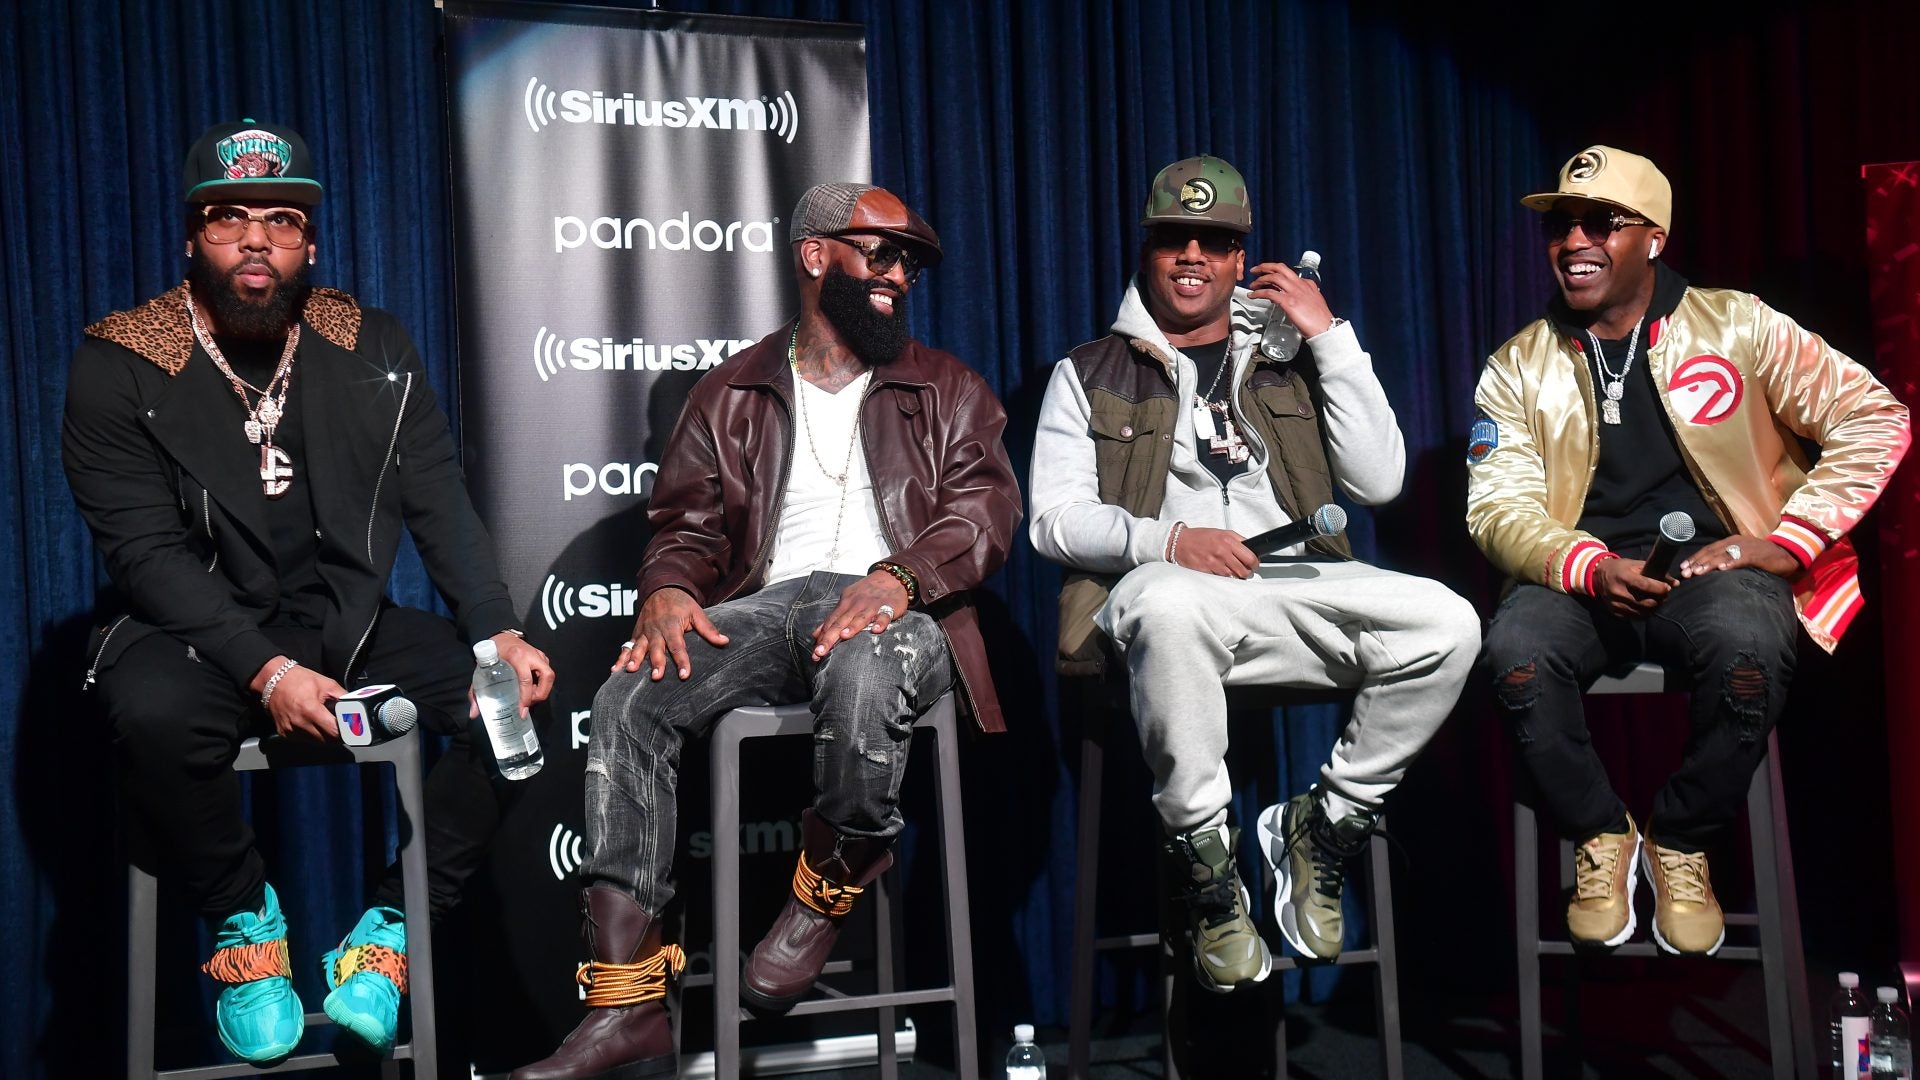 Here's What To Expect From Jagged Edge At ESSENCE Festival